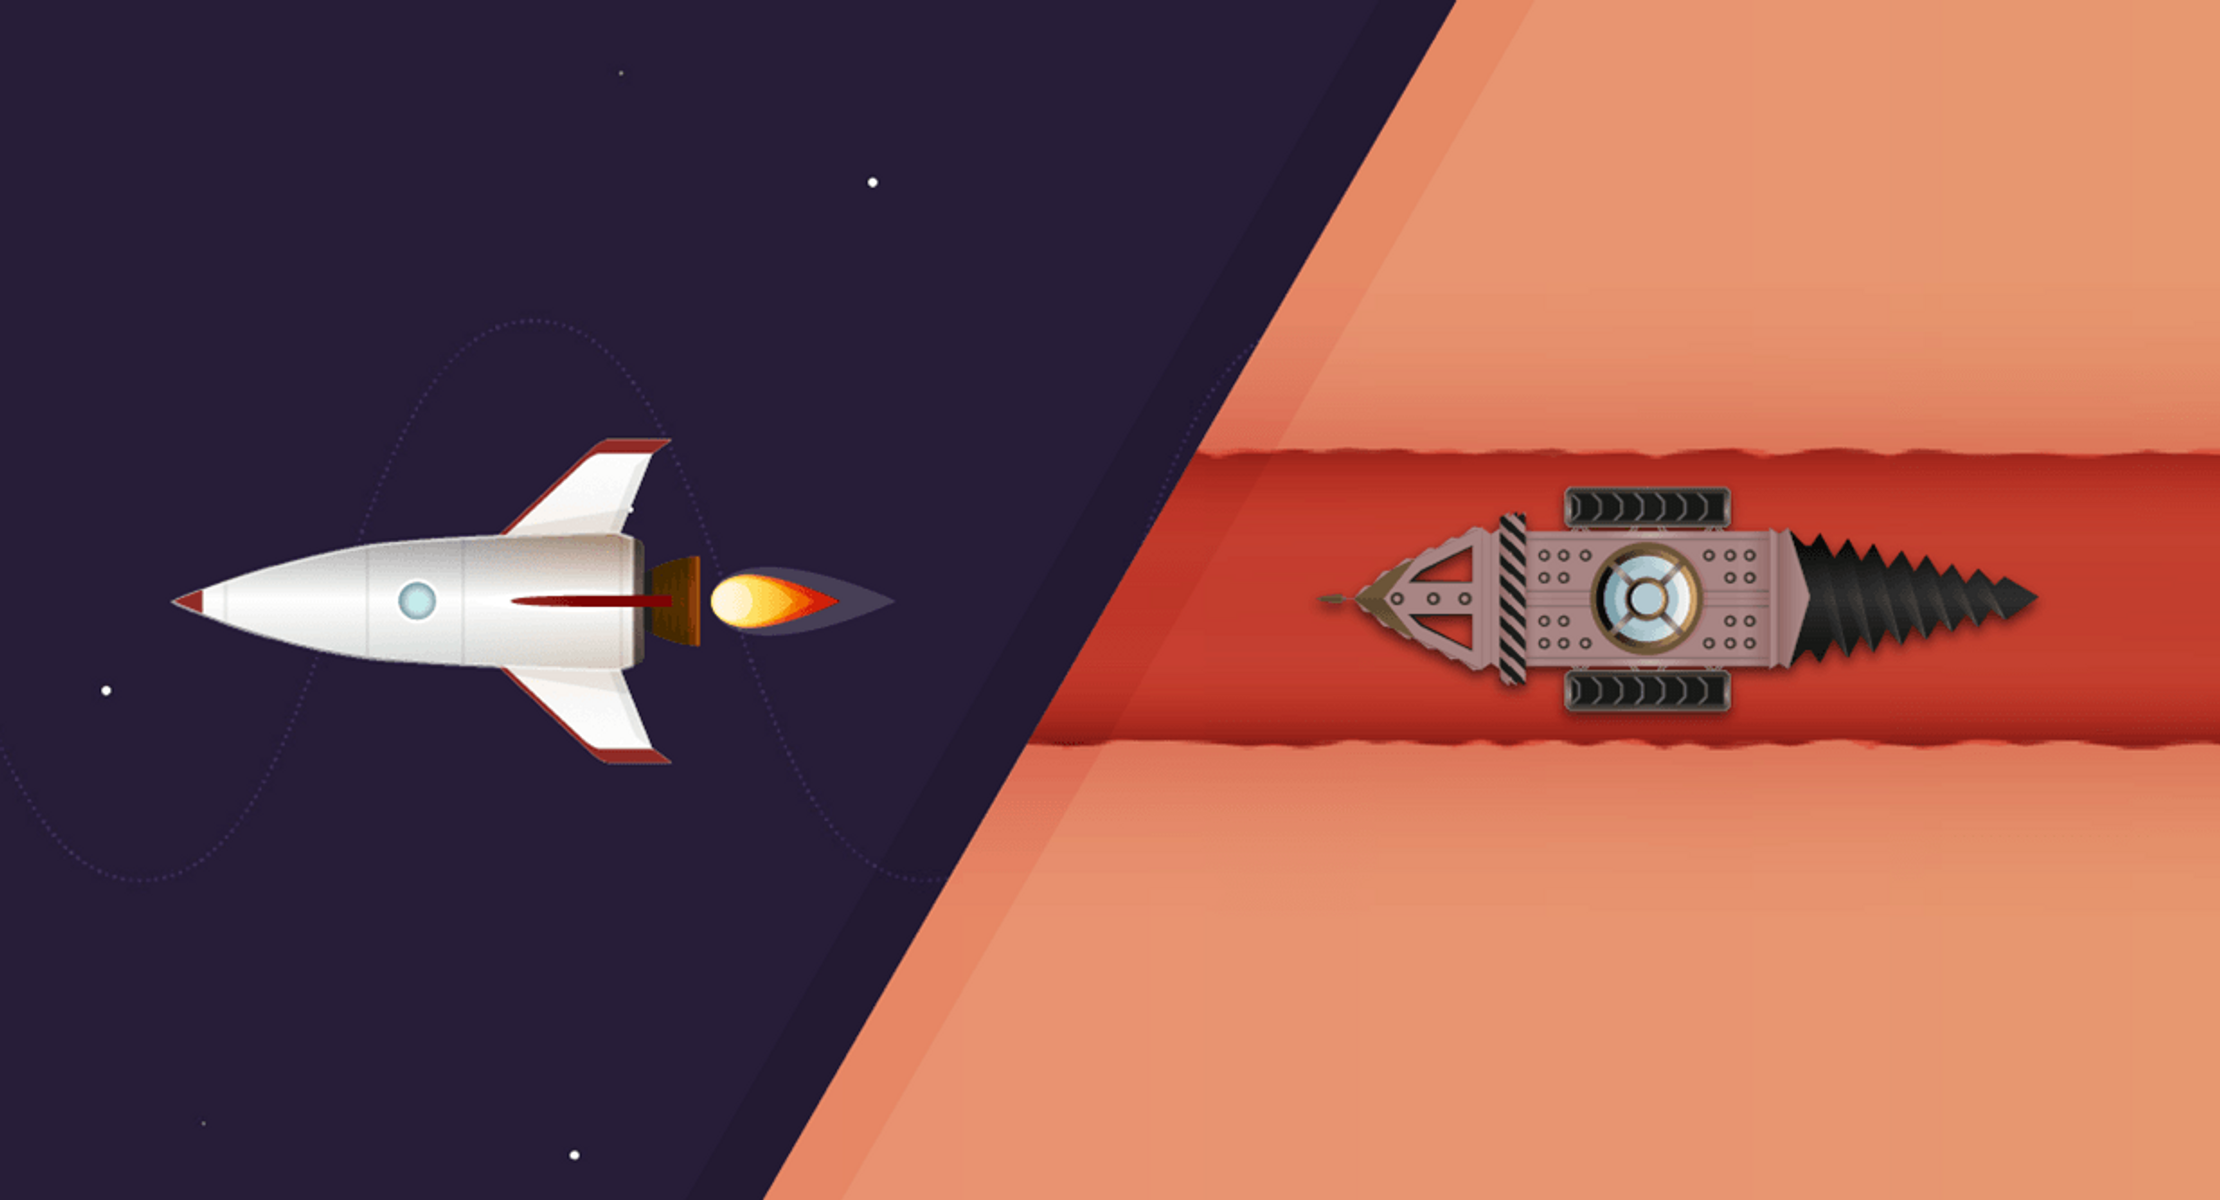 Two illustrated images seperated by a diagonal line through the middle of the picture. On the left, a white space rocket with its thruster burning as it points to the left of frame. On the right, a 'drill capsule' is digging through a tunnel, it's drill pointed to the right as it moves in that same direction.